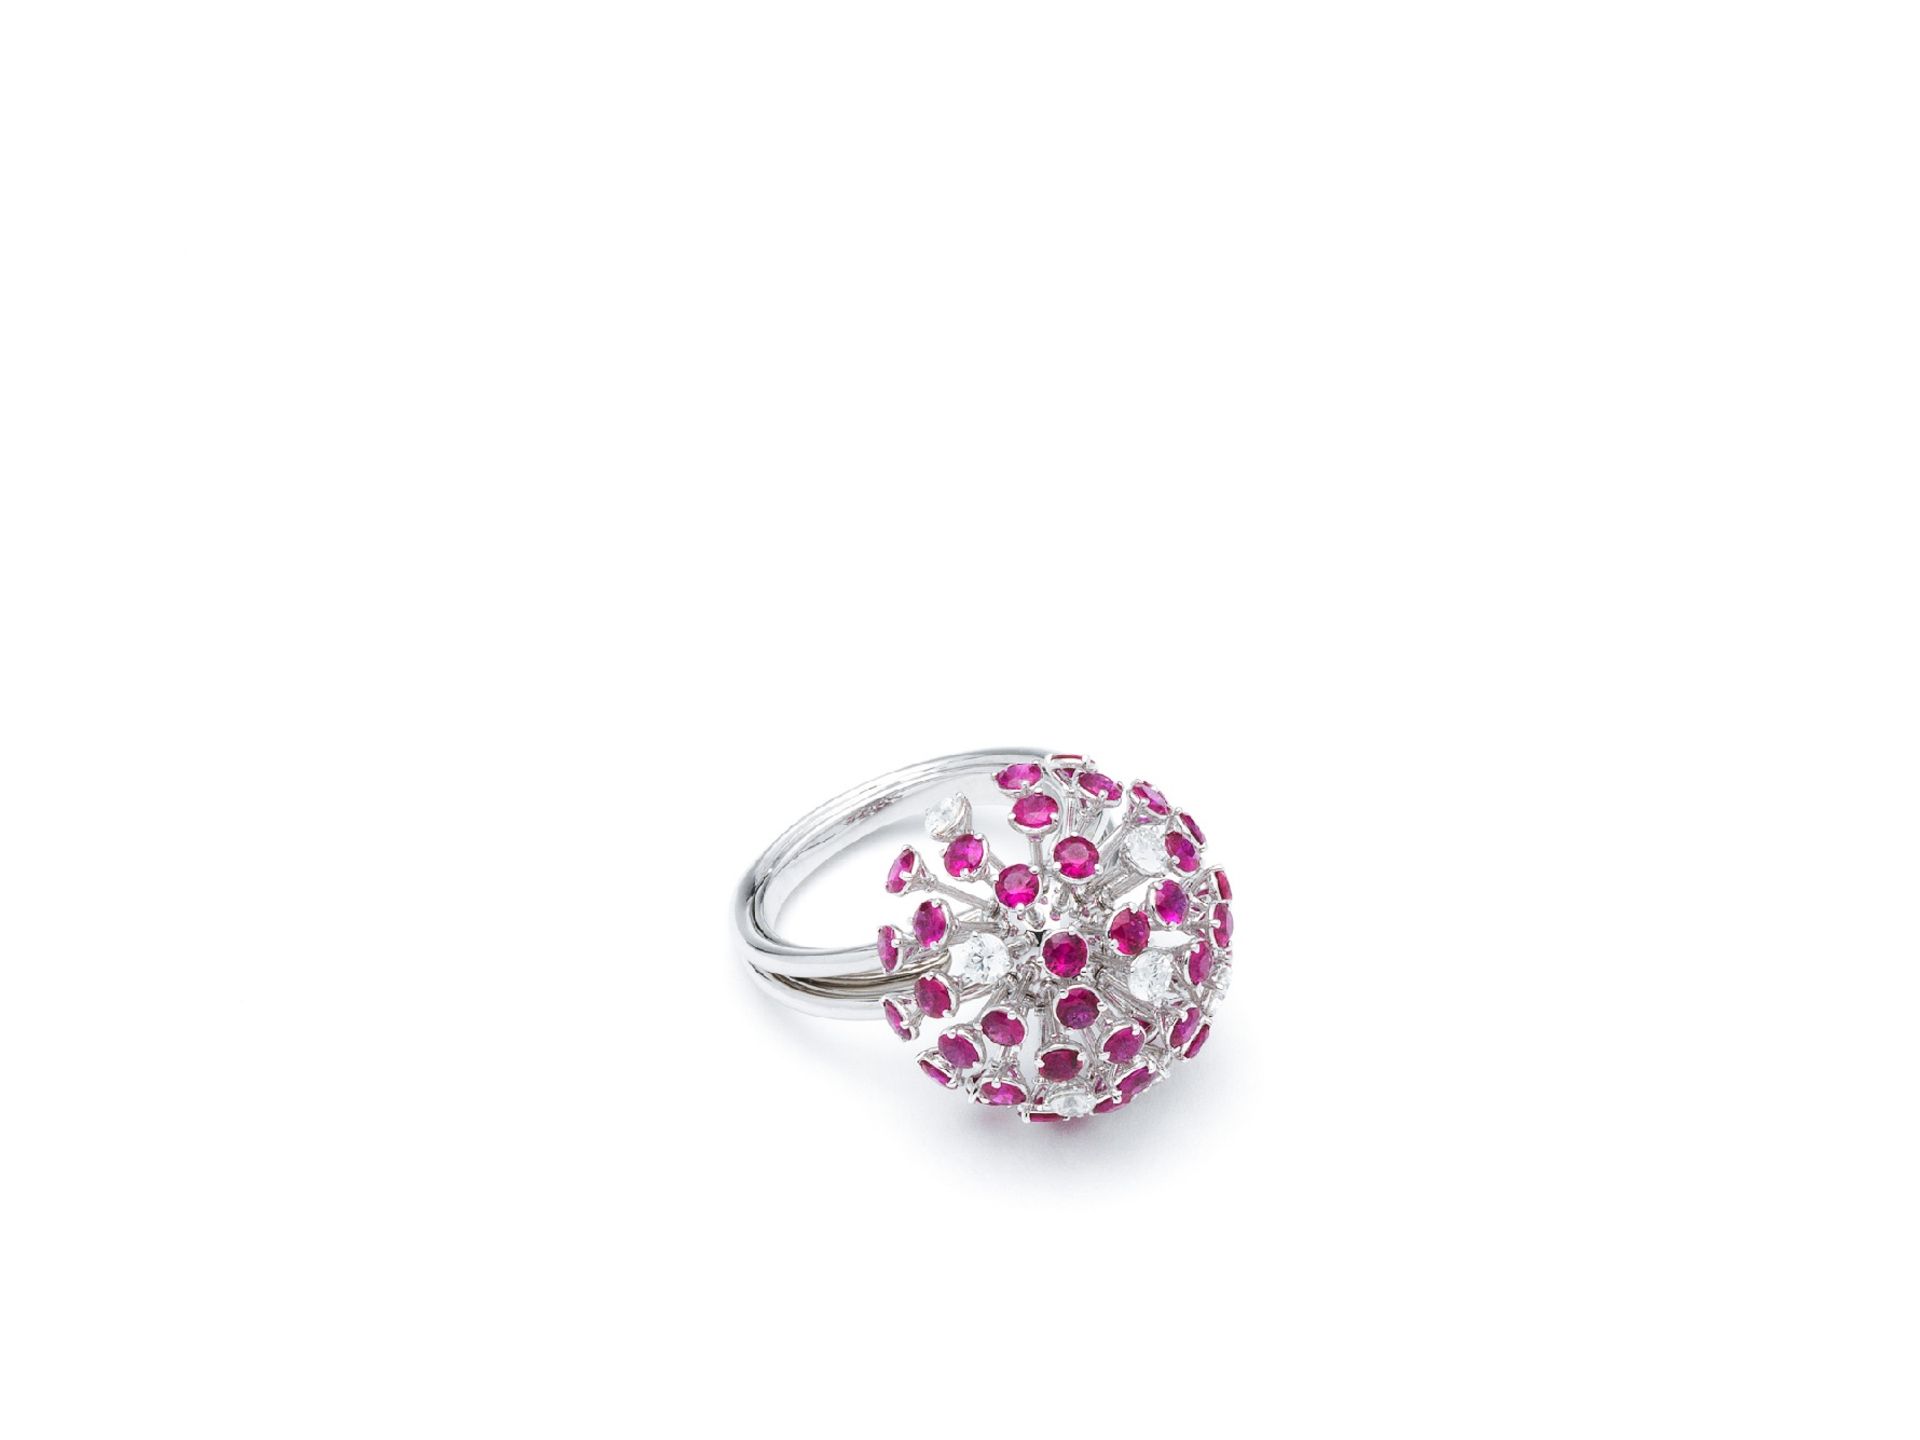 Ring with brilliant diamonds and rubies - Image 3 of 5